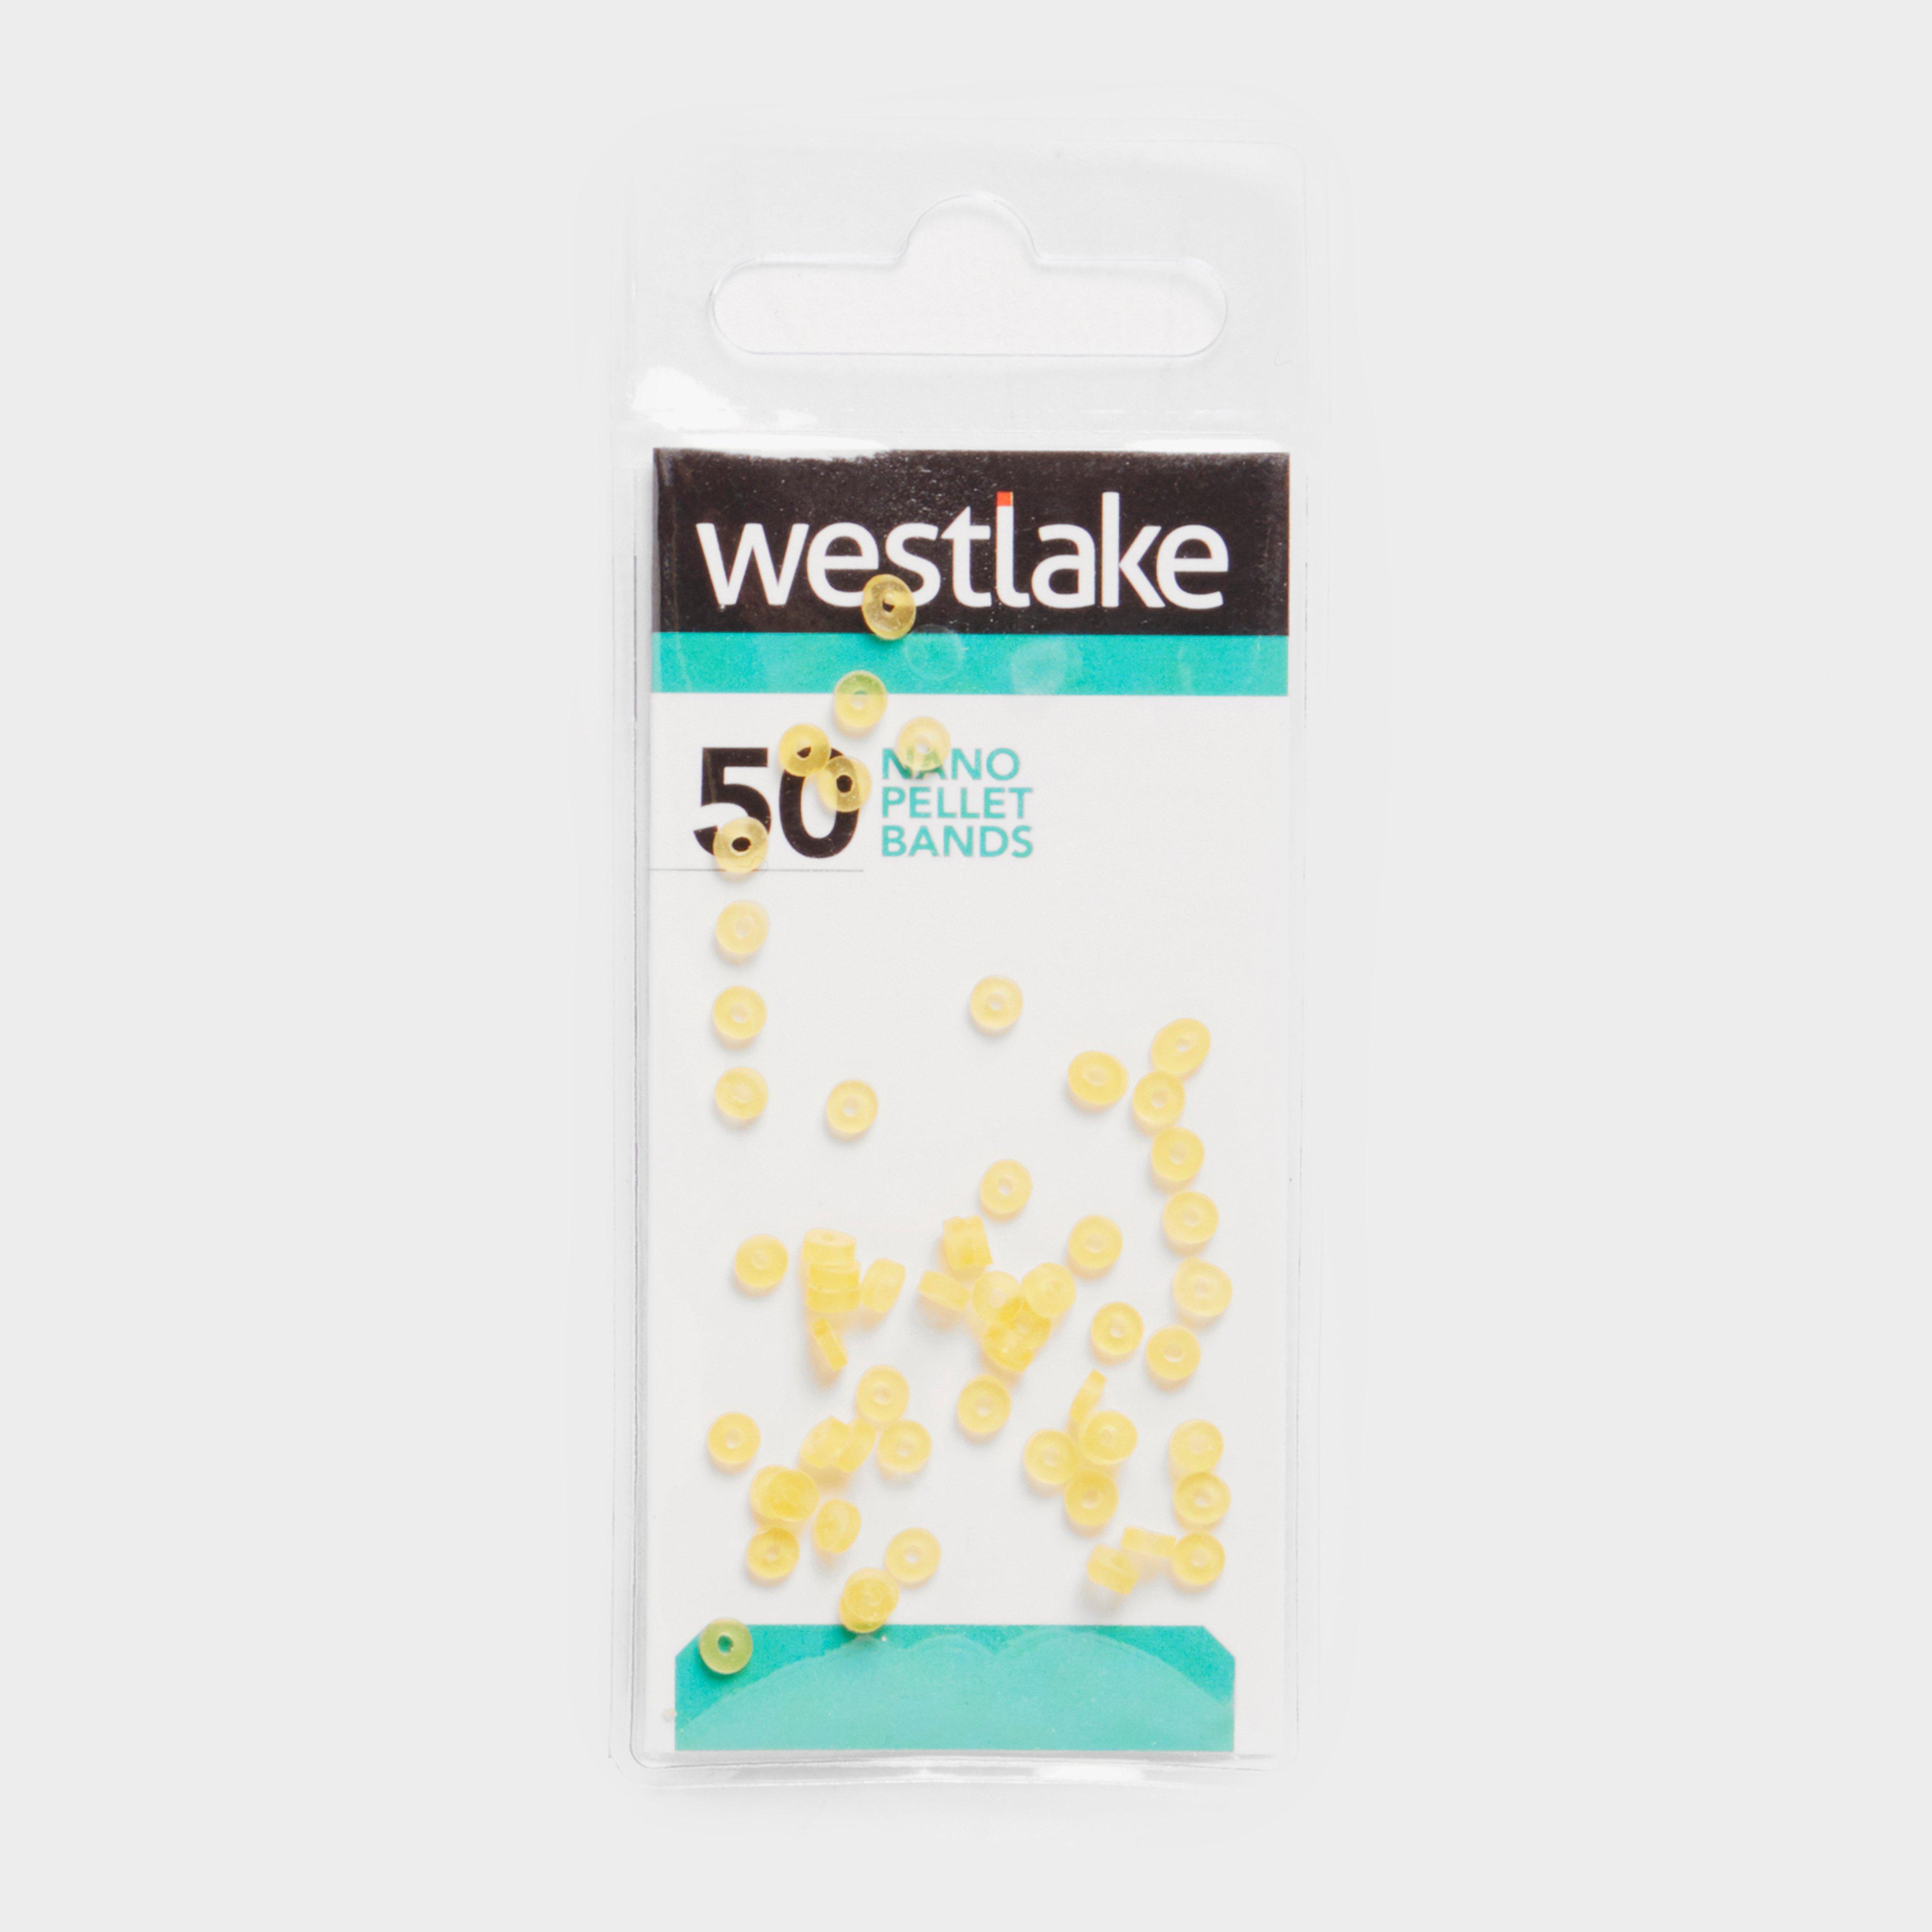 Photos - Other for Fishing West Lake Westlake Nano Pellet Bands 50Pc, Silver 